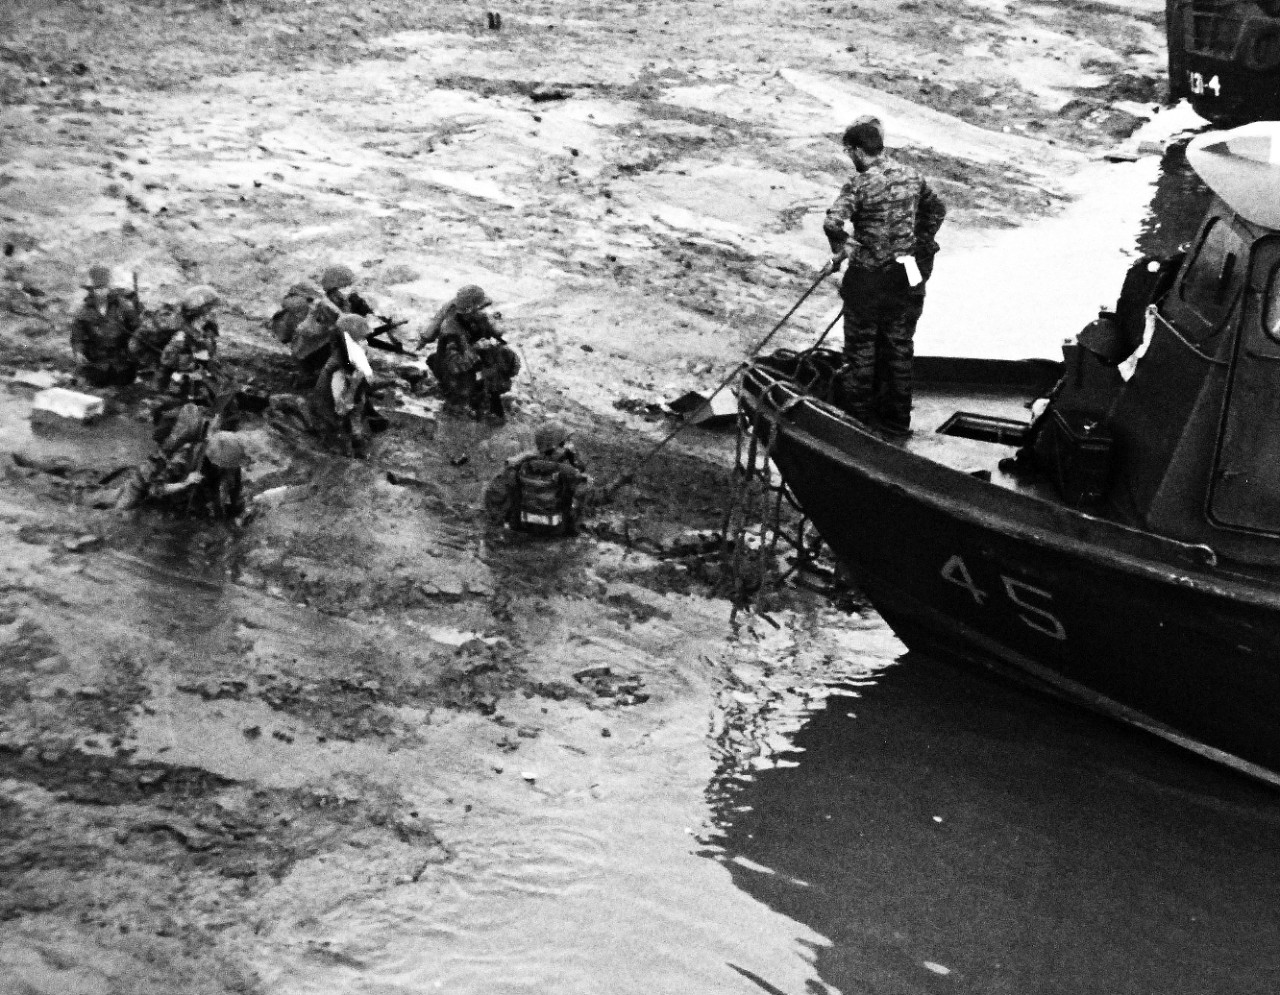 428-GX-USN 1139672:  Patrol Craft Fast (PCF), April 1969.    Republic of Vietnam.  Vietnamese troops wade through mud to board US Navy Inshore Patrol Craft (PCF) near Old Nam Can on the Song Chau Lon River.  Photographed by PHC A.R. Hill, April 1969.  Official U.S. Navy photograph, now in the collections of the National Archives. 